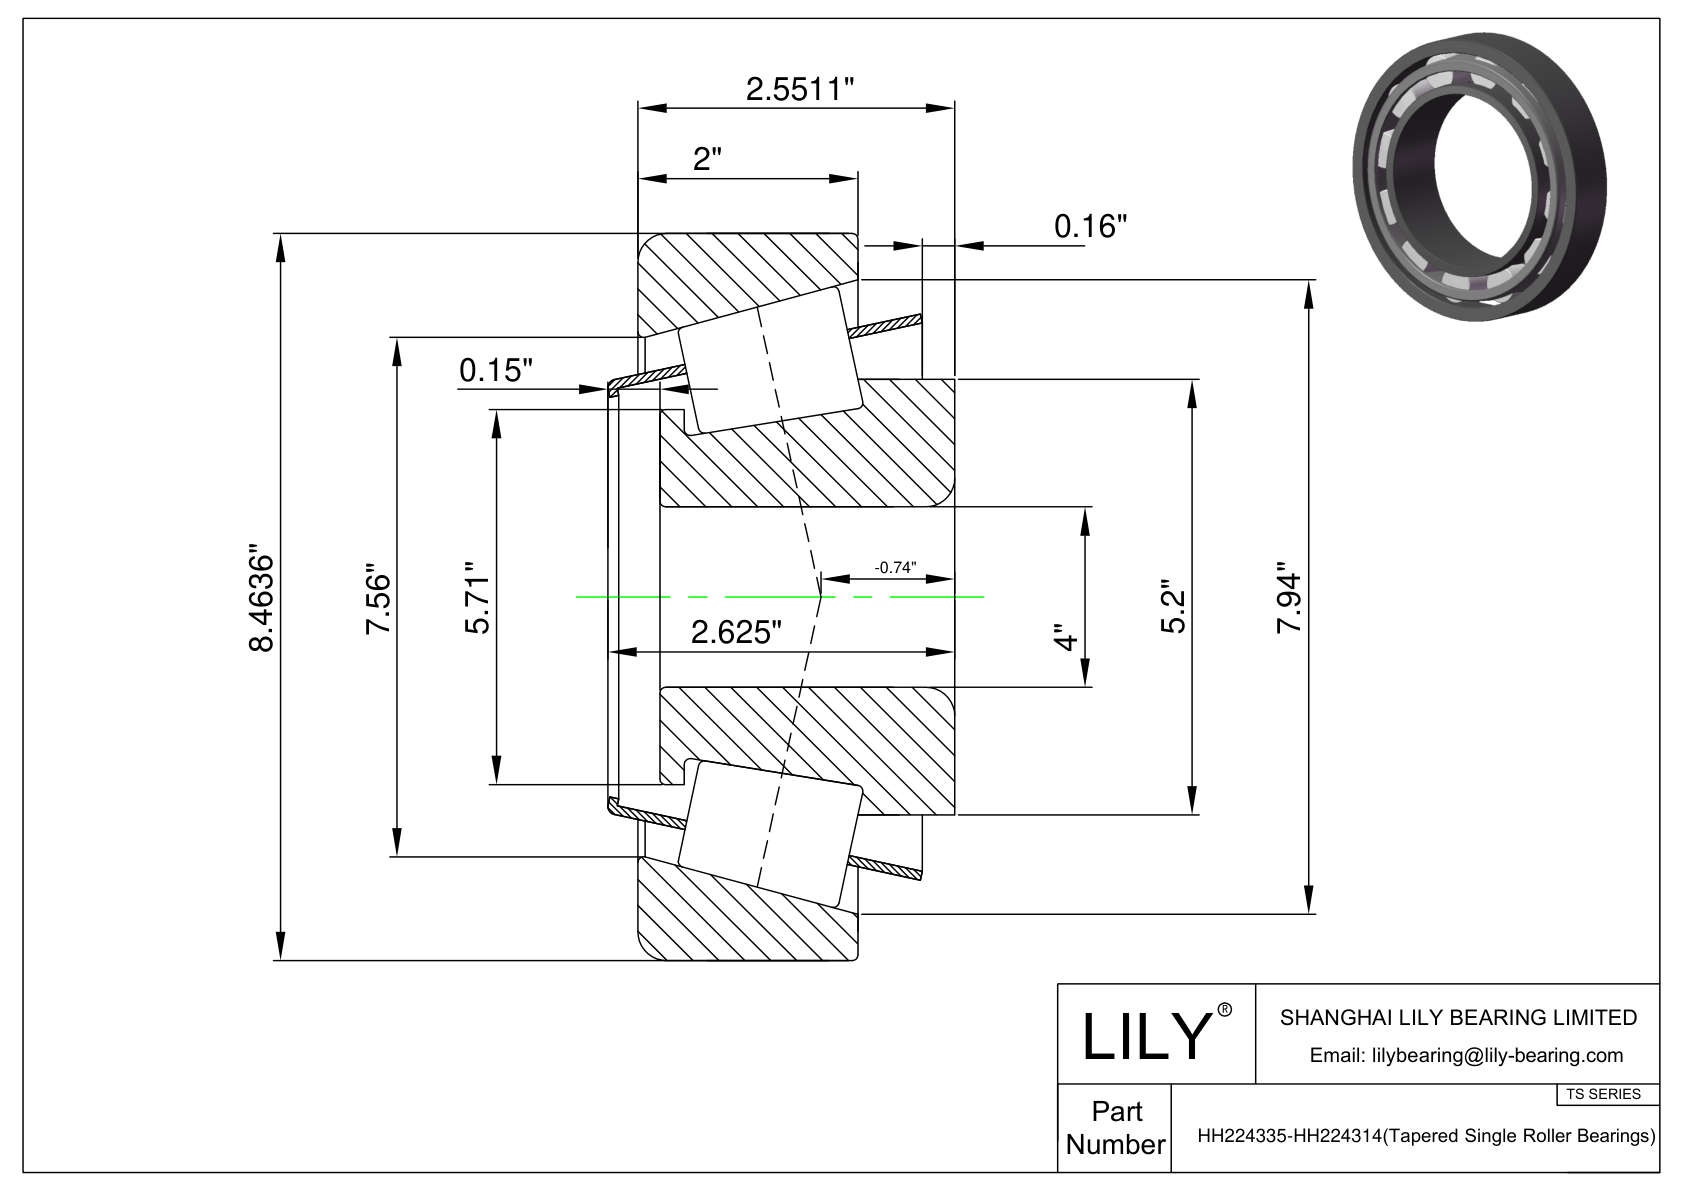 HH224335-HH224314 TS (Tapered Single Roller Bearings) (Imperial) cad drawing